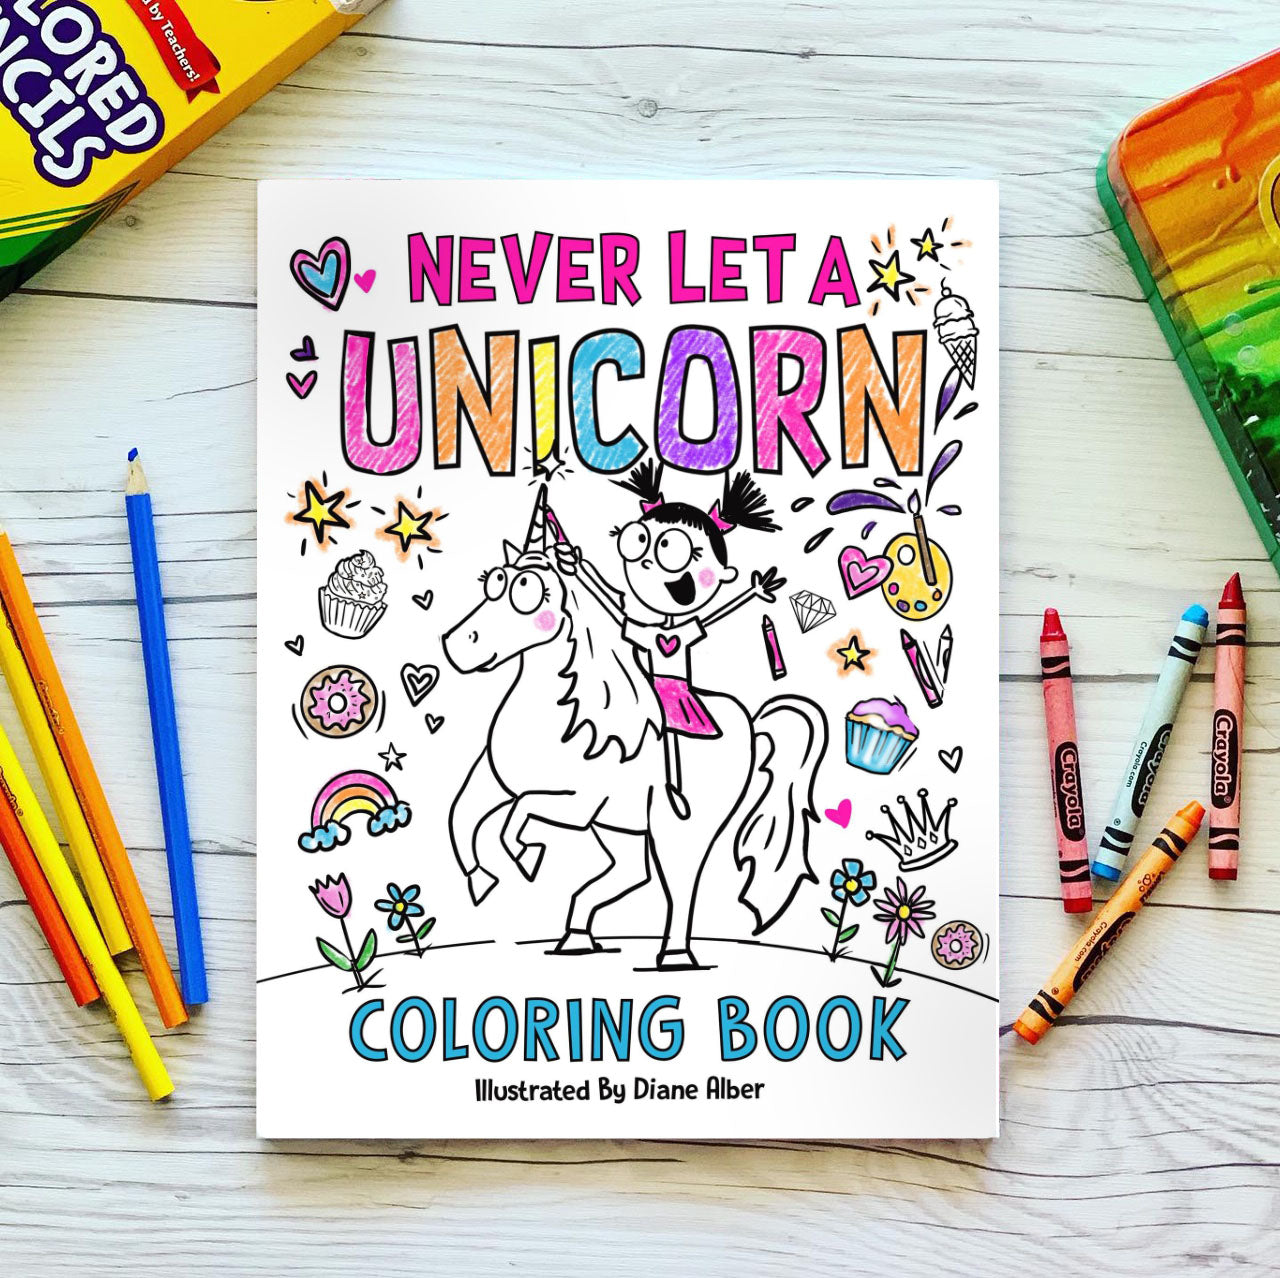 Color Me Under the Sea: An Adorable Adult Coloring Book [Book]